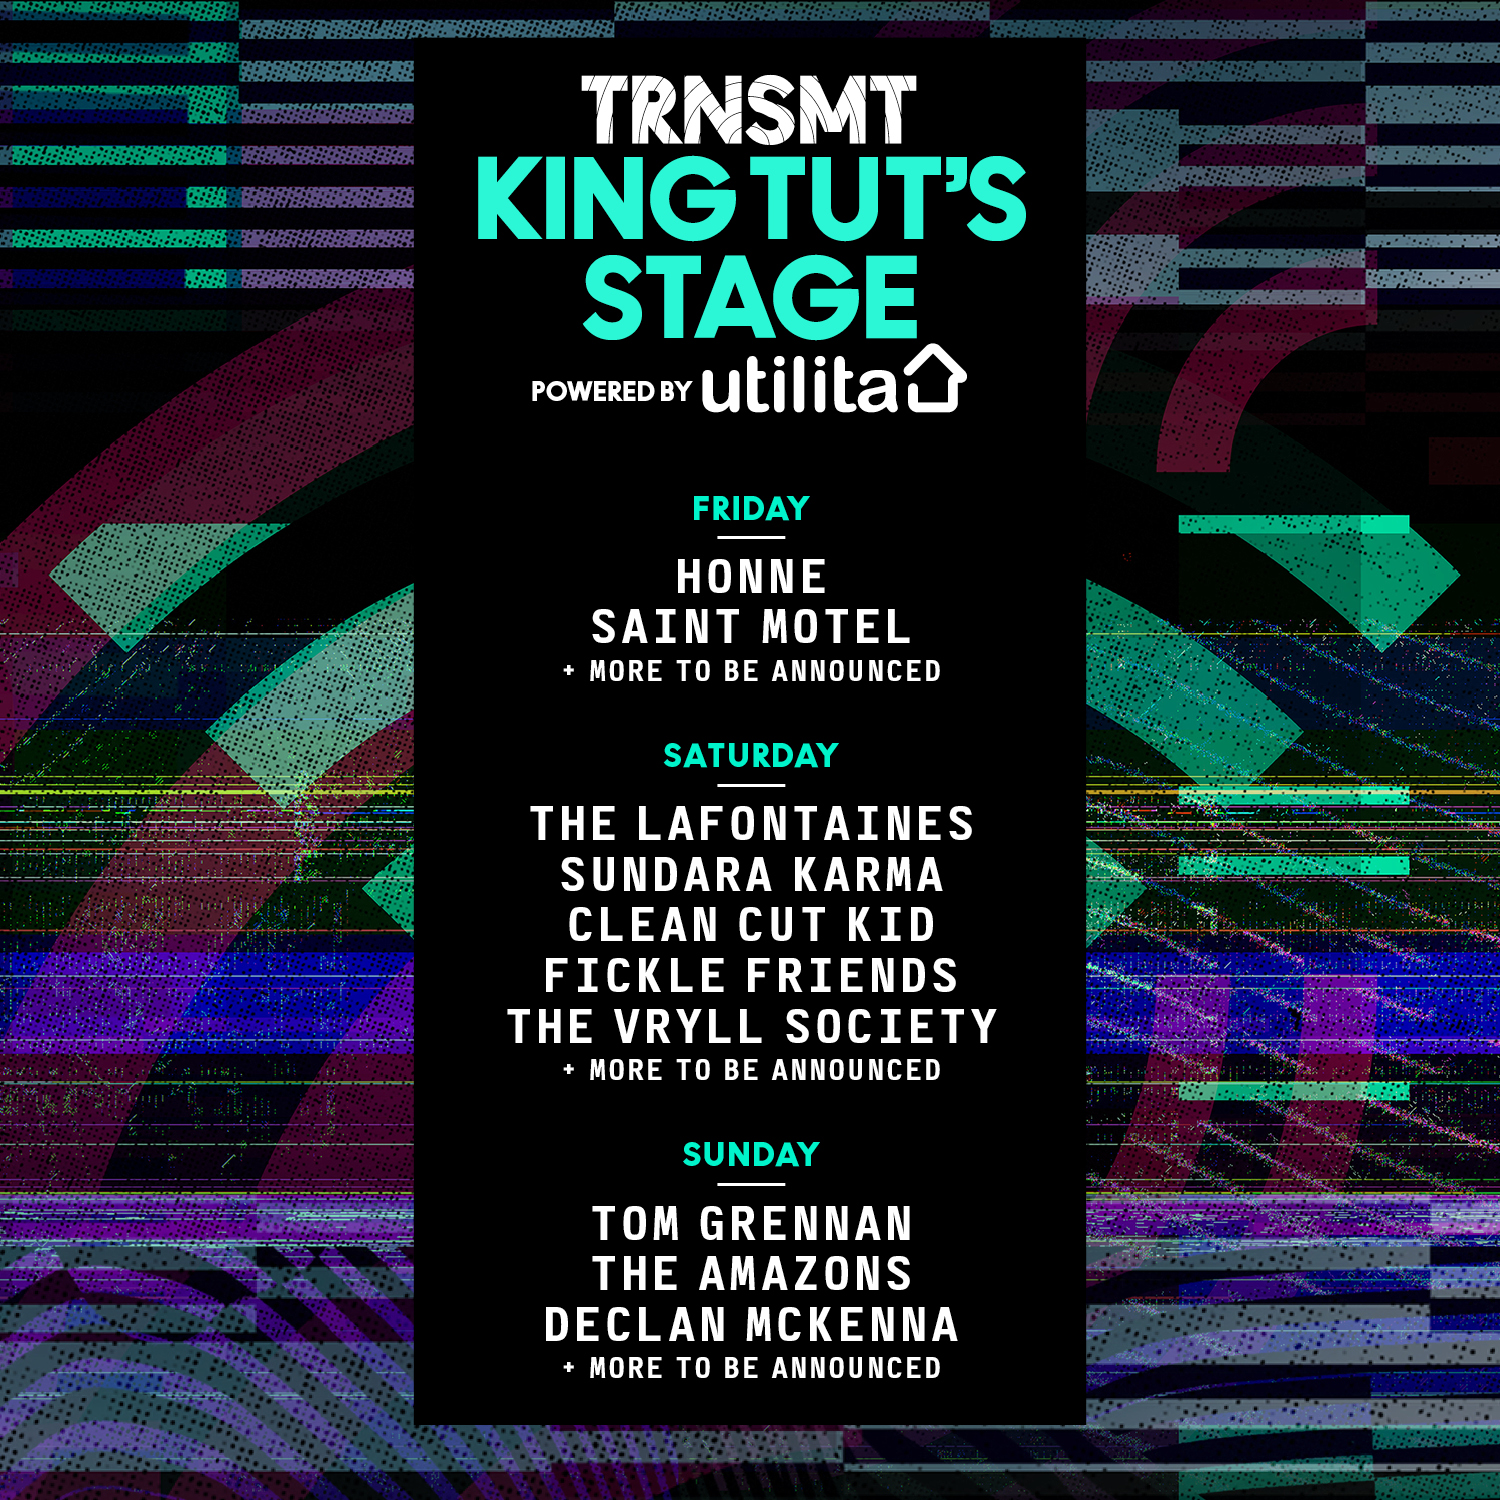 First artists announced for King Tut’s Stage at TRNSMT Festival 2017